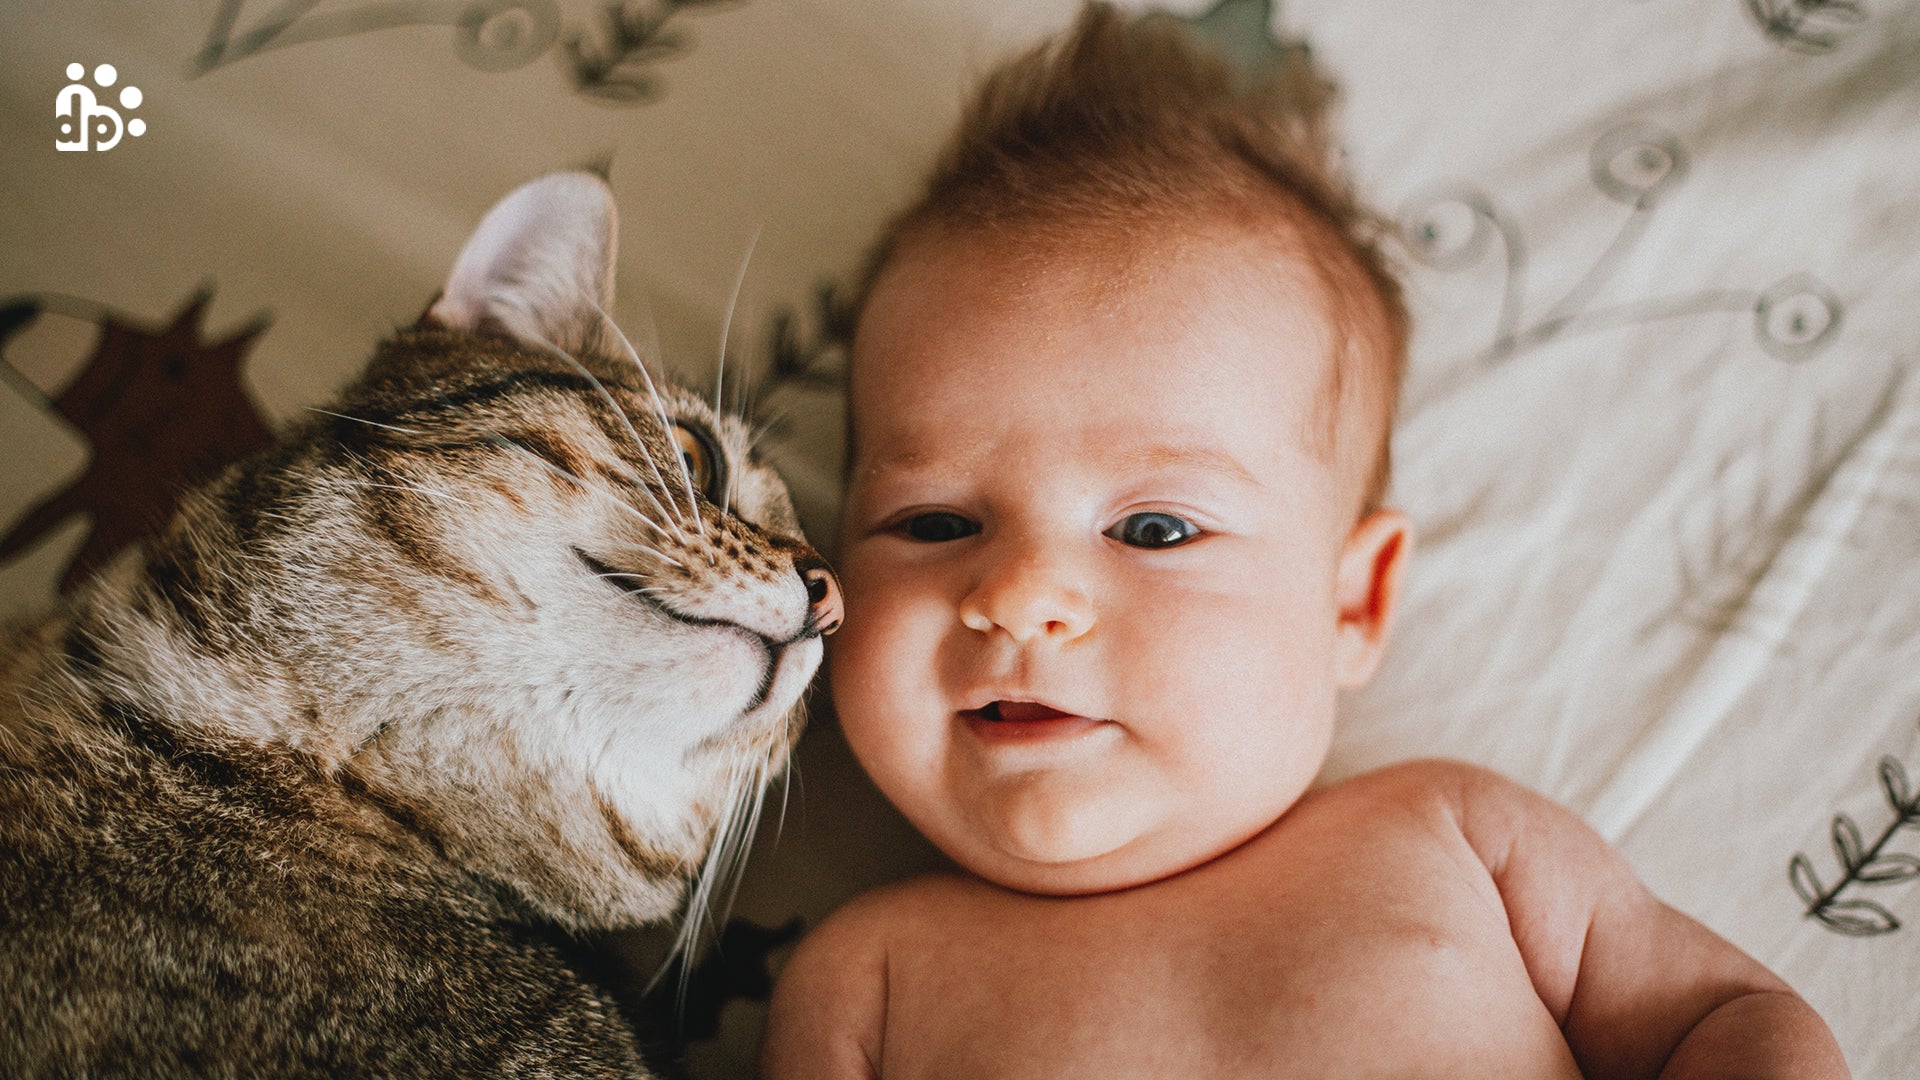 are cats or dogs better with babies